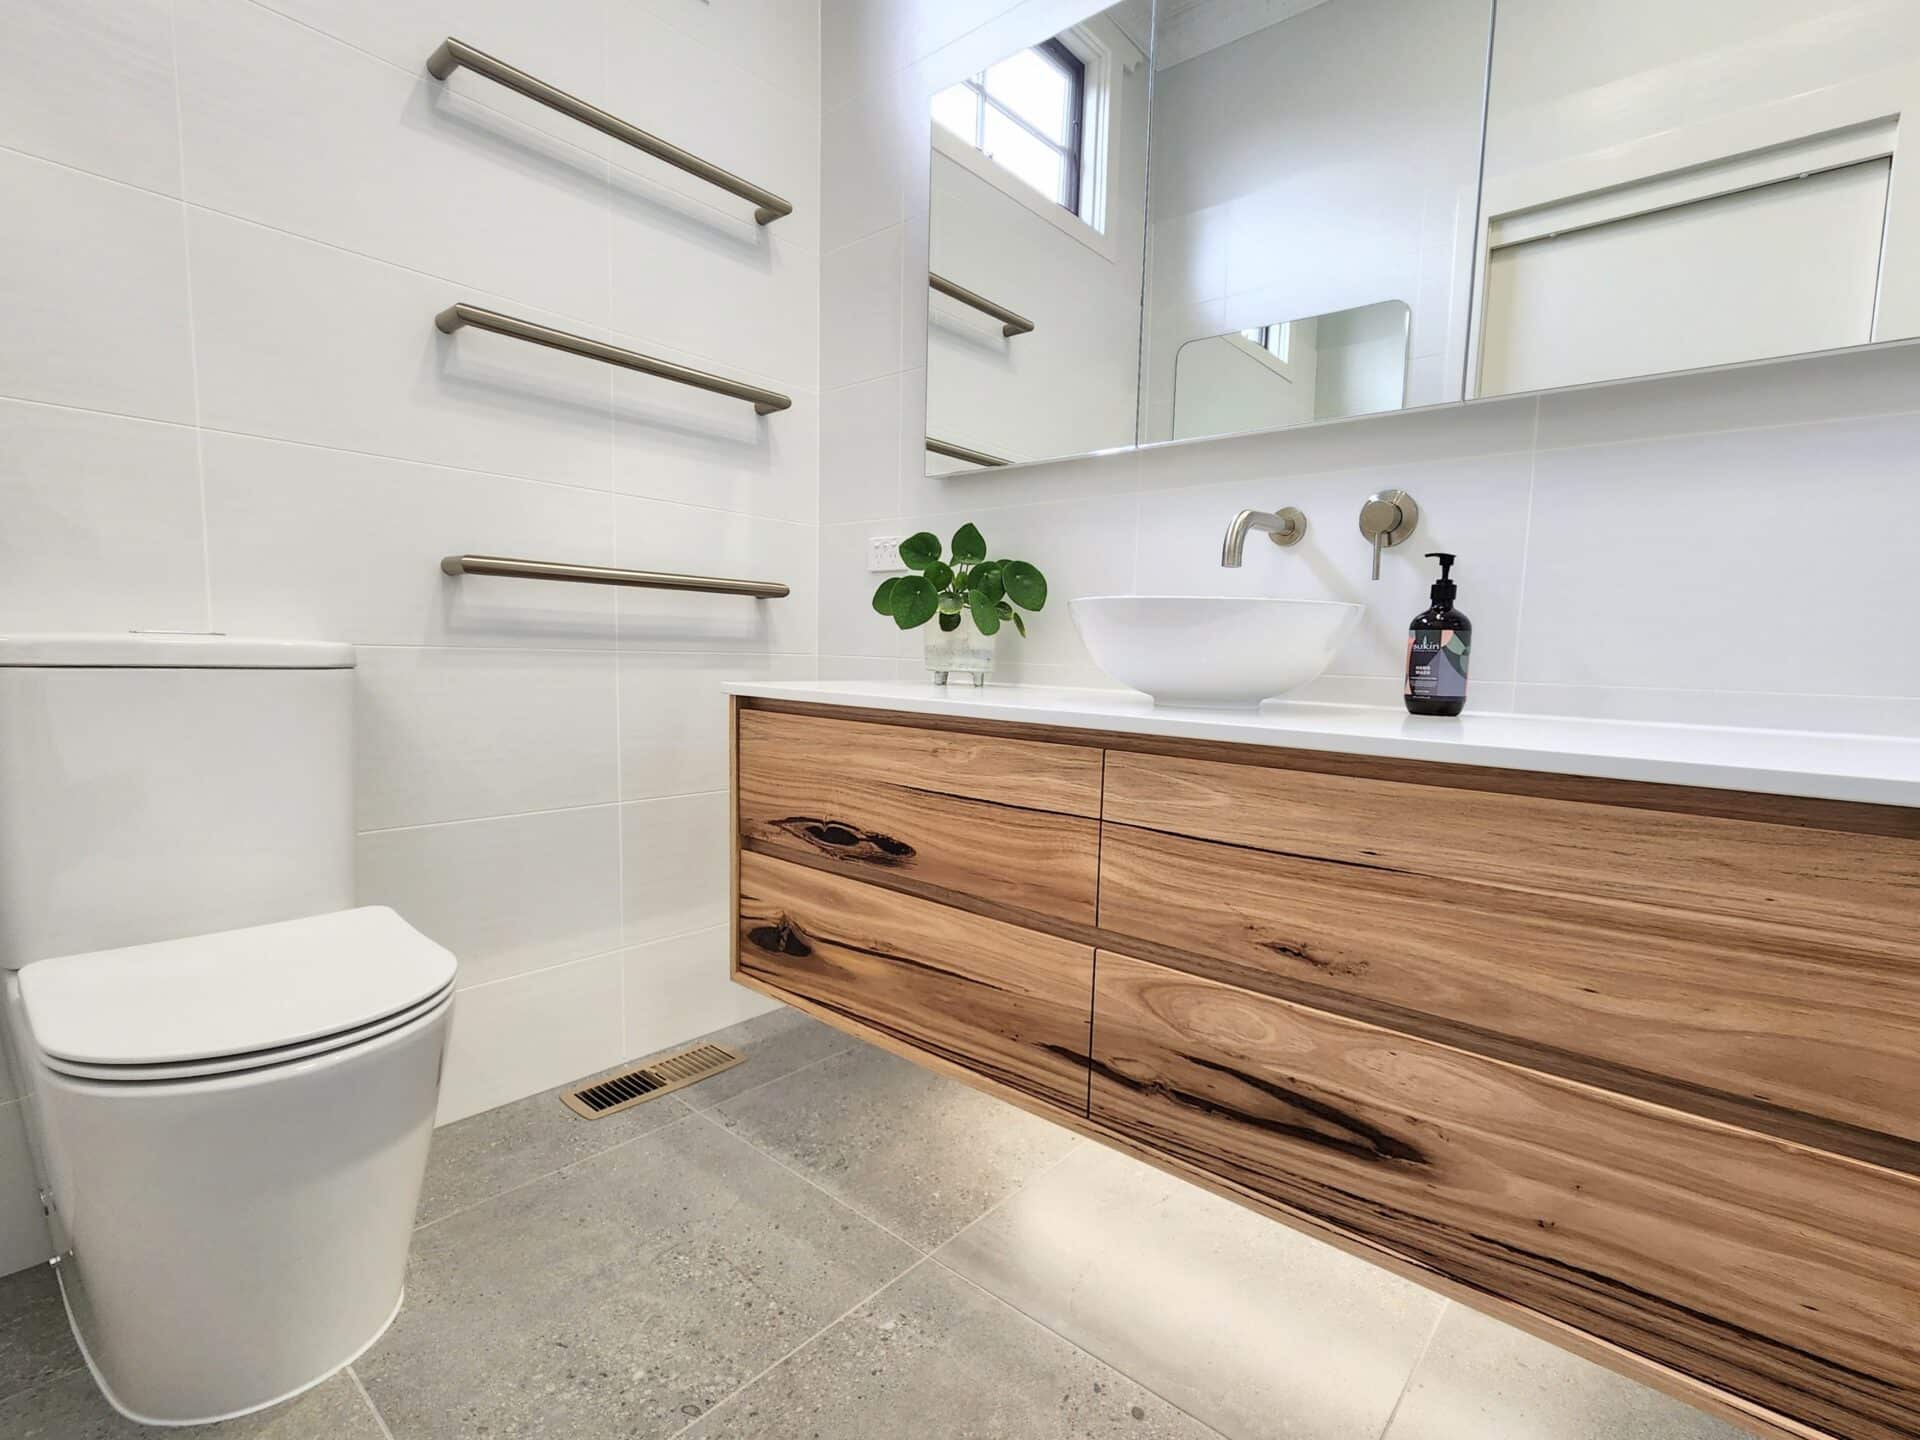 a white modern bathroom with gray floor tiles, white sink, and a wood cabinet.